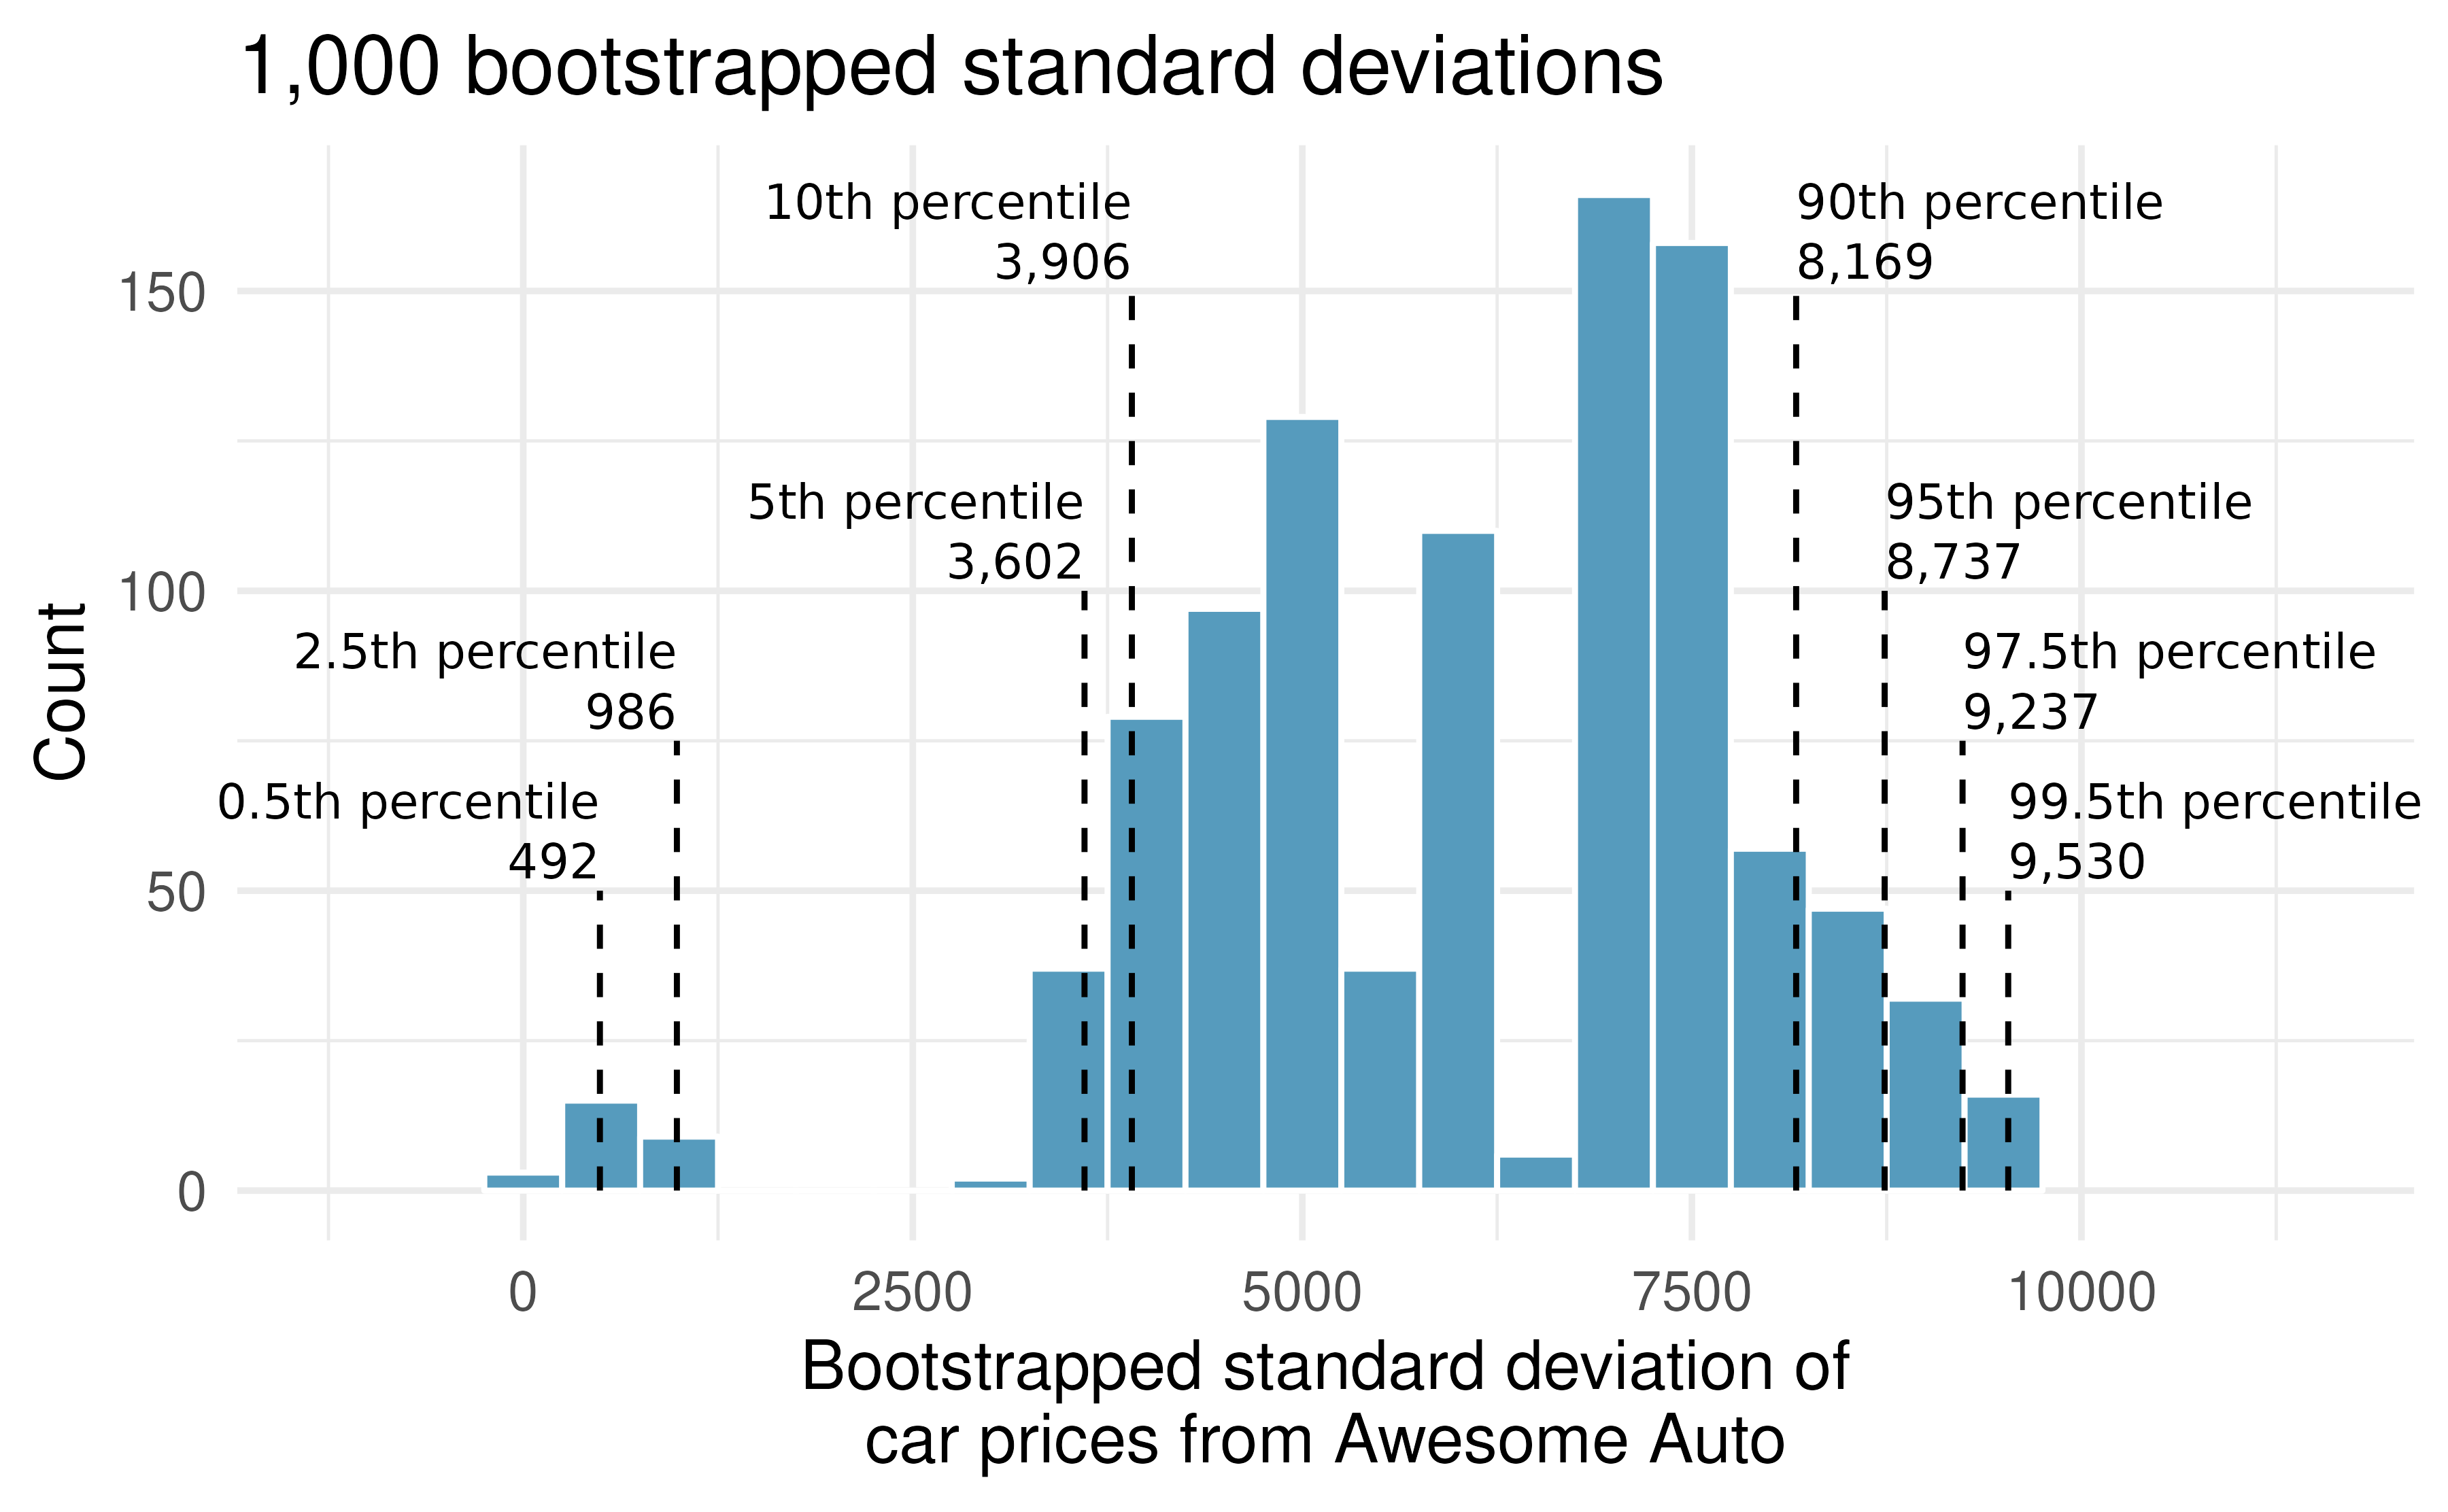 The original Awesome Auto data is bootstrapped 1,000 times. The histogram provides a sense for the variability of the standard deviation of the car prices from sample to sample.